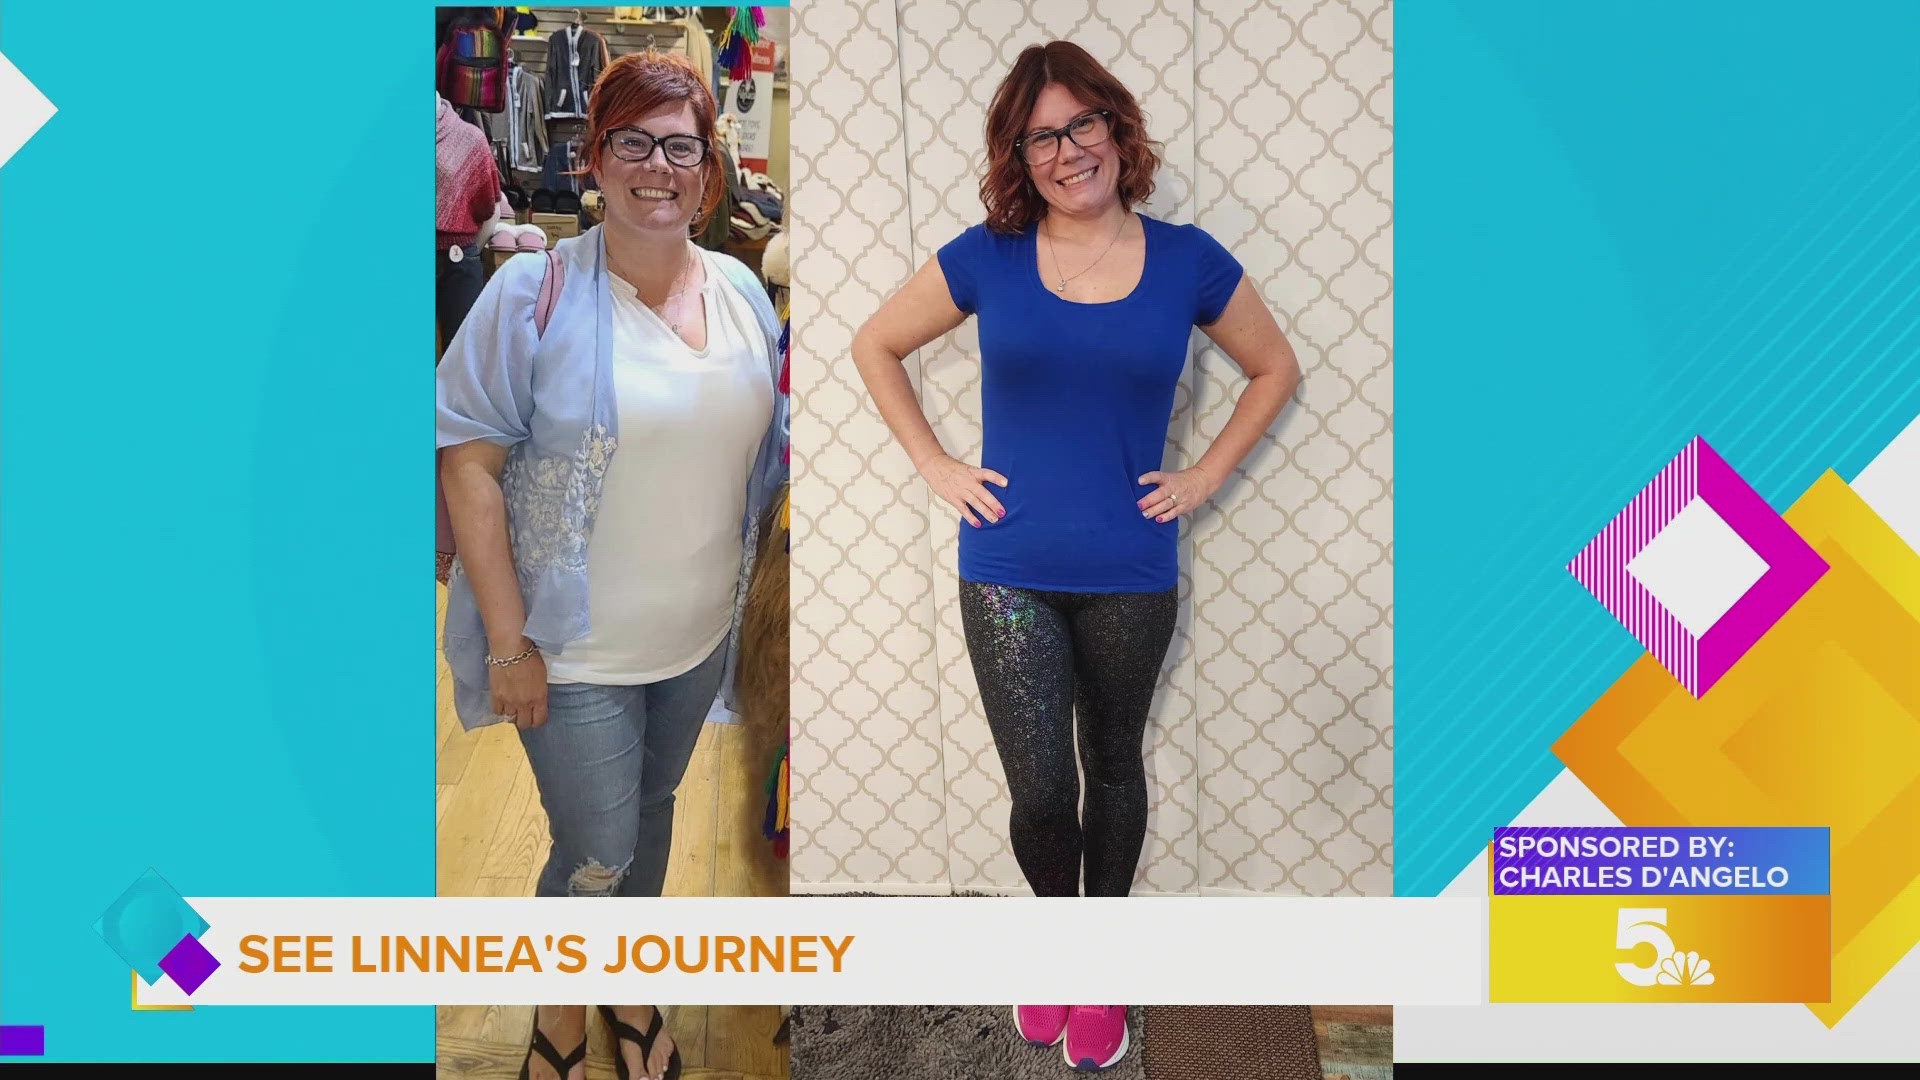 She's a mom of three and manages her family and life better than before. See her transformation journey after working with Charles D'Angelo.